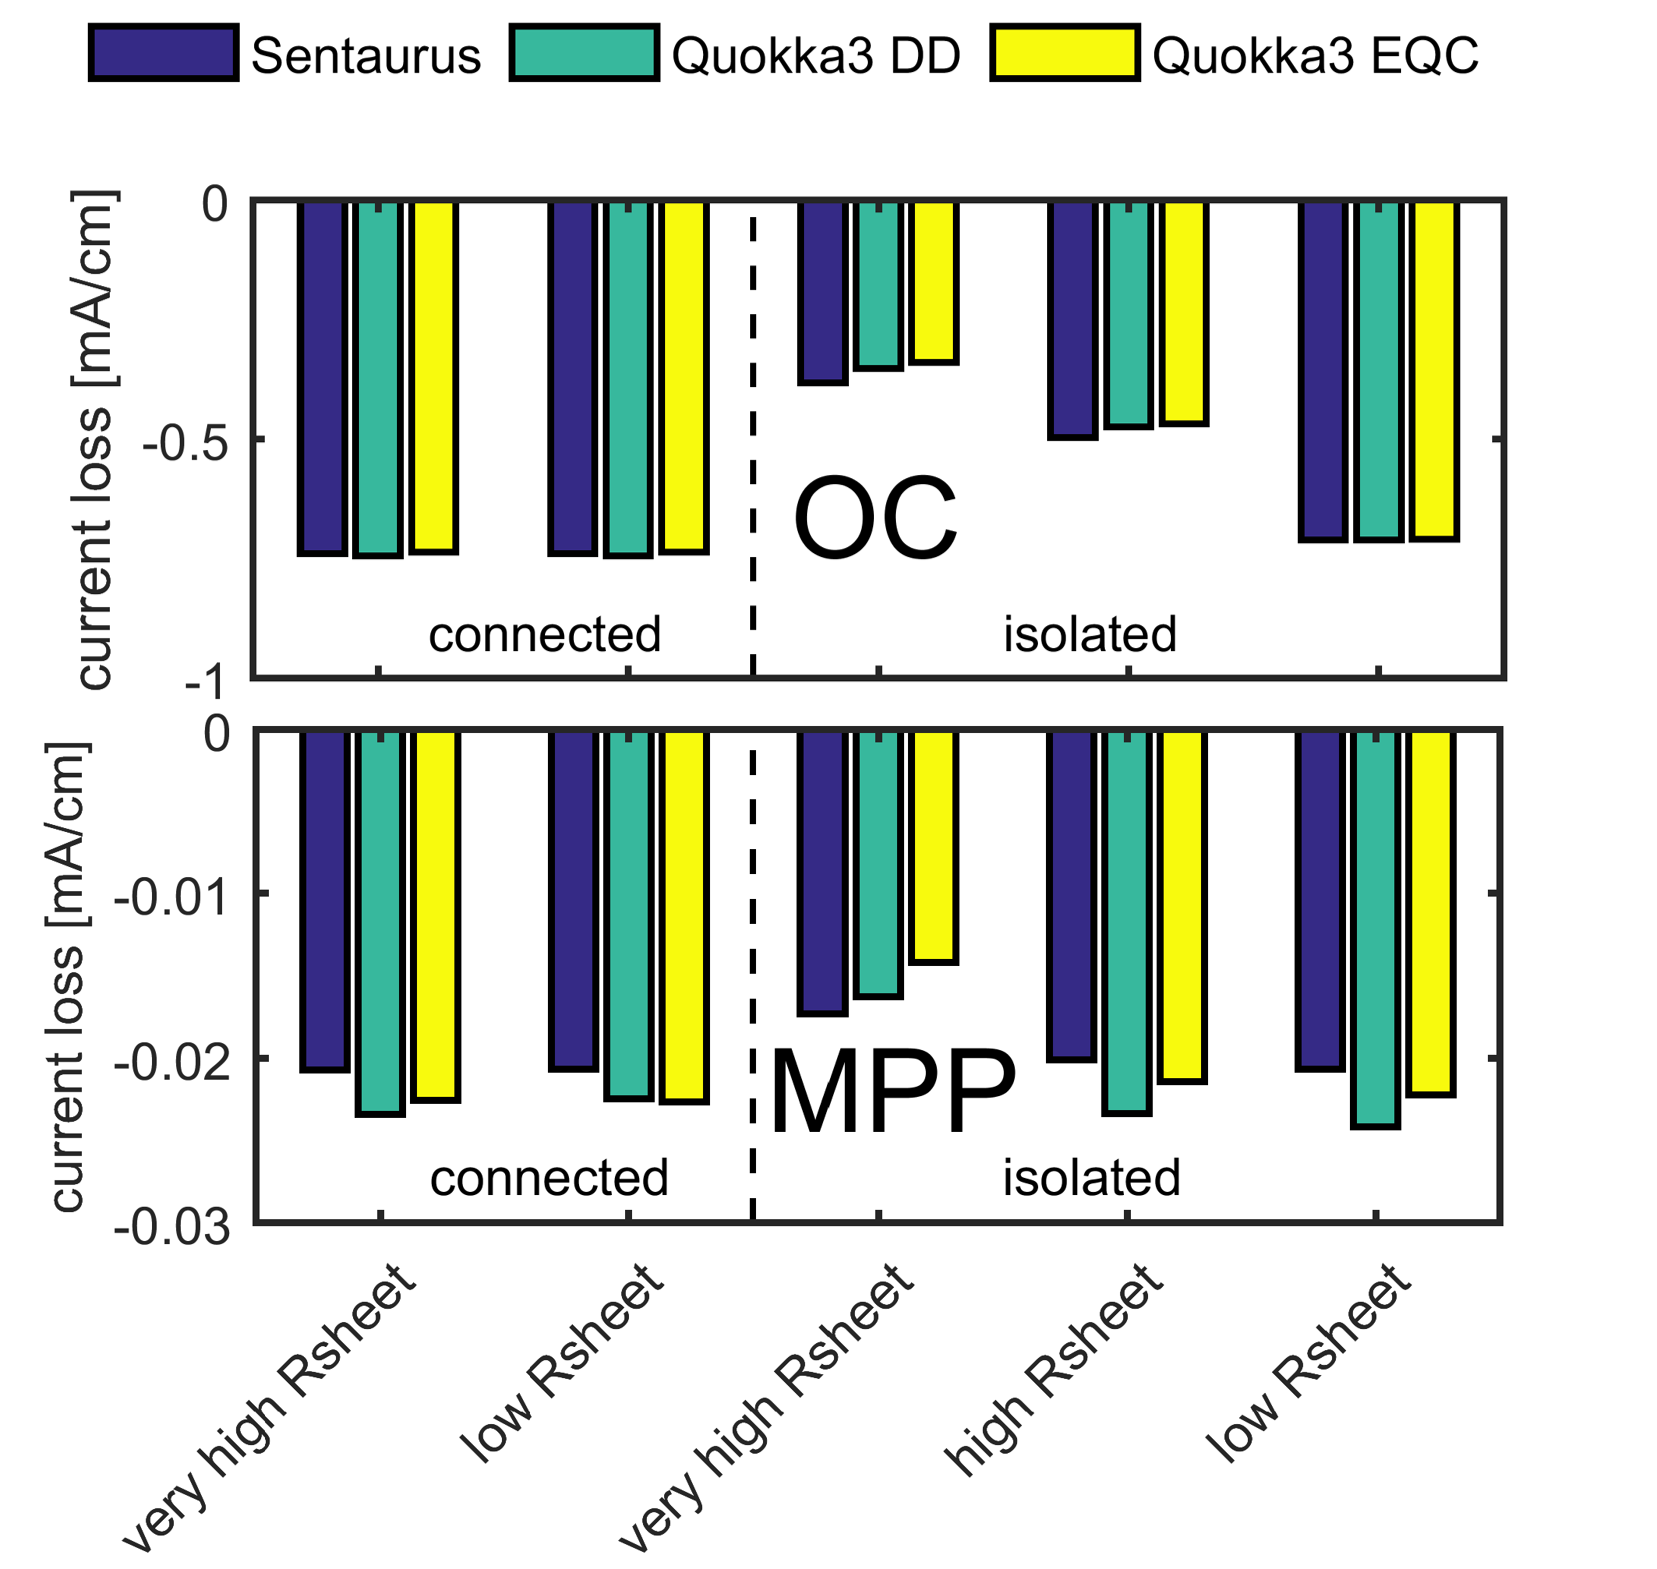 updated Fig. 6 of the original tandem JPV paper, showing that Quokka3 now correctly accounts for lateral conduction effects between the bottom and top cell